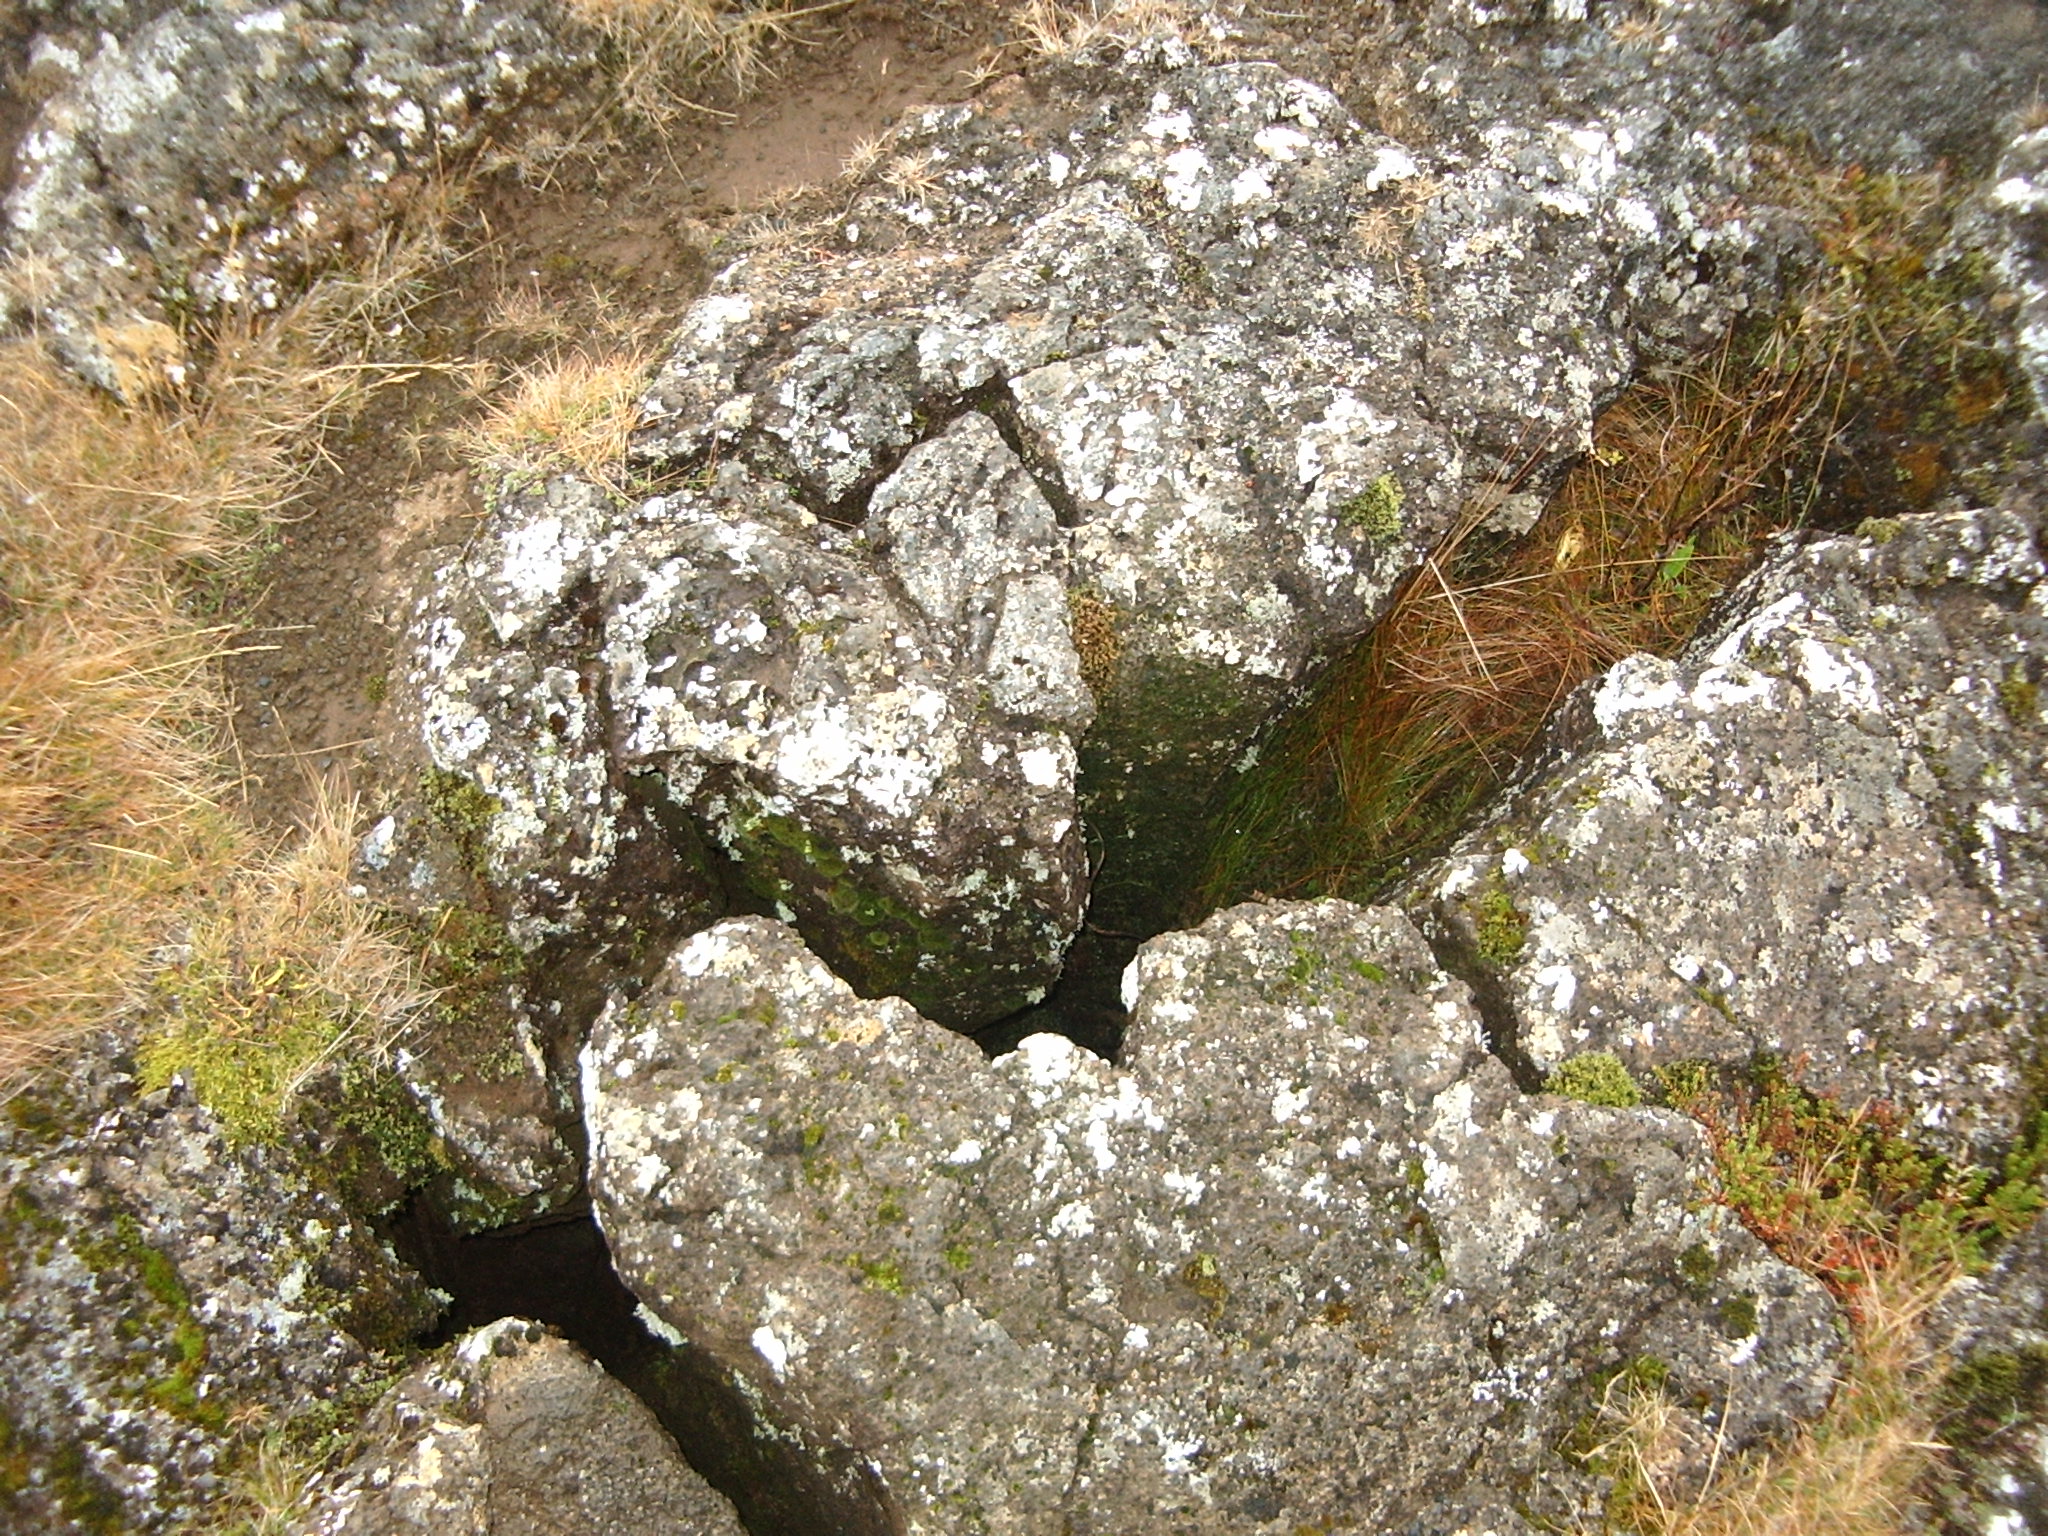 Cracks Crevice in the rock.